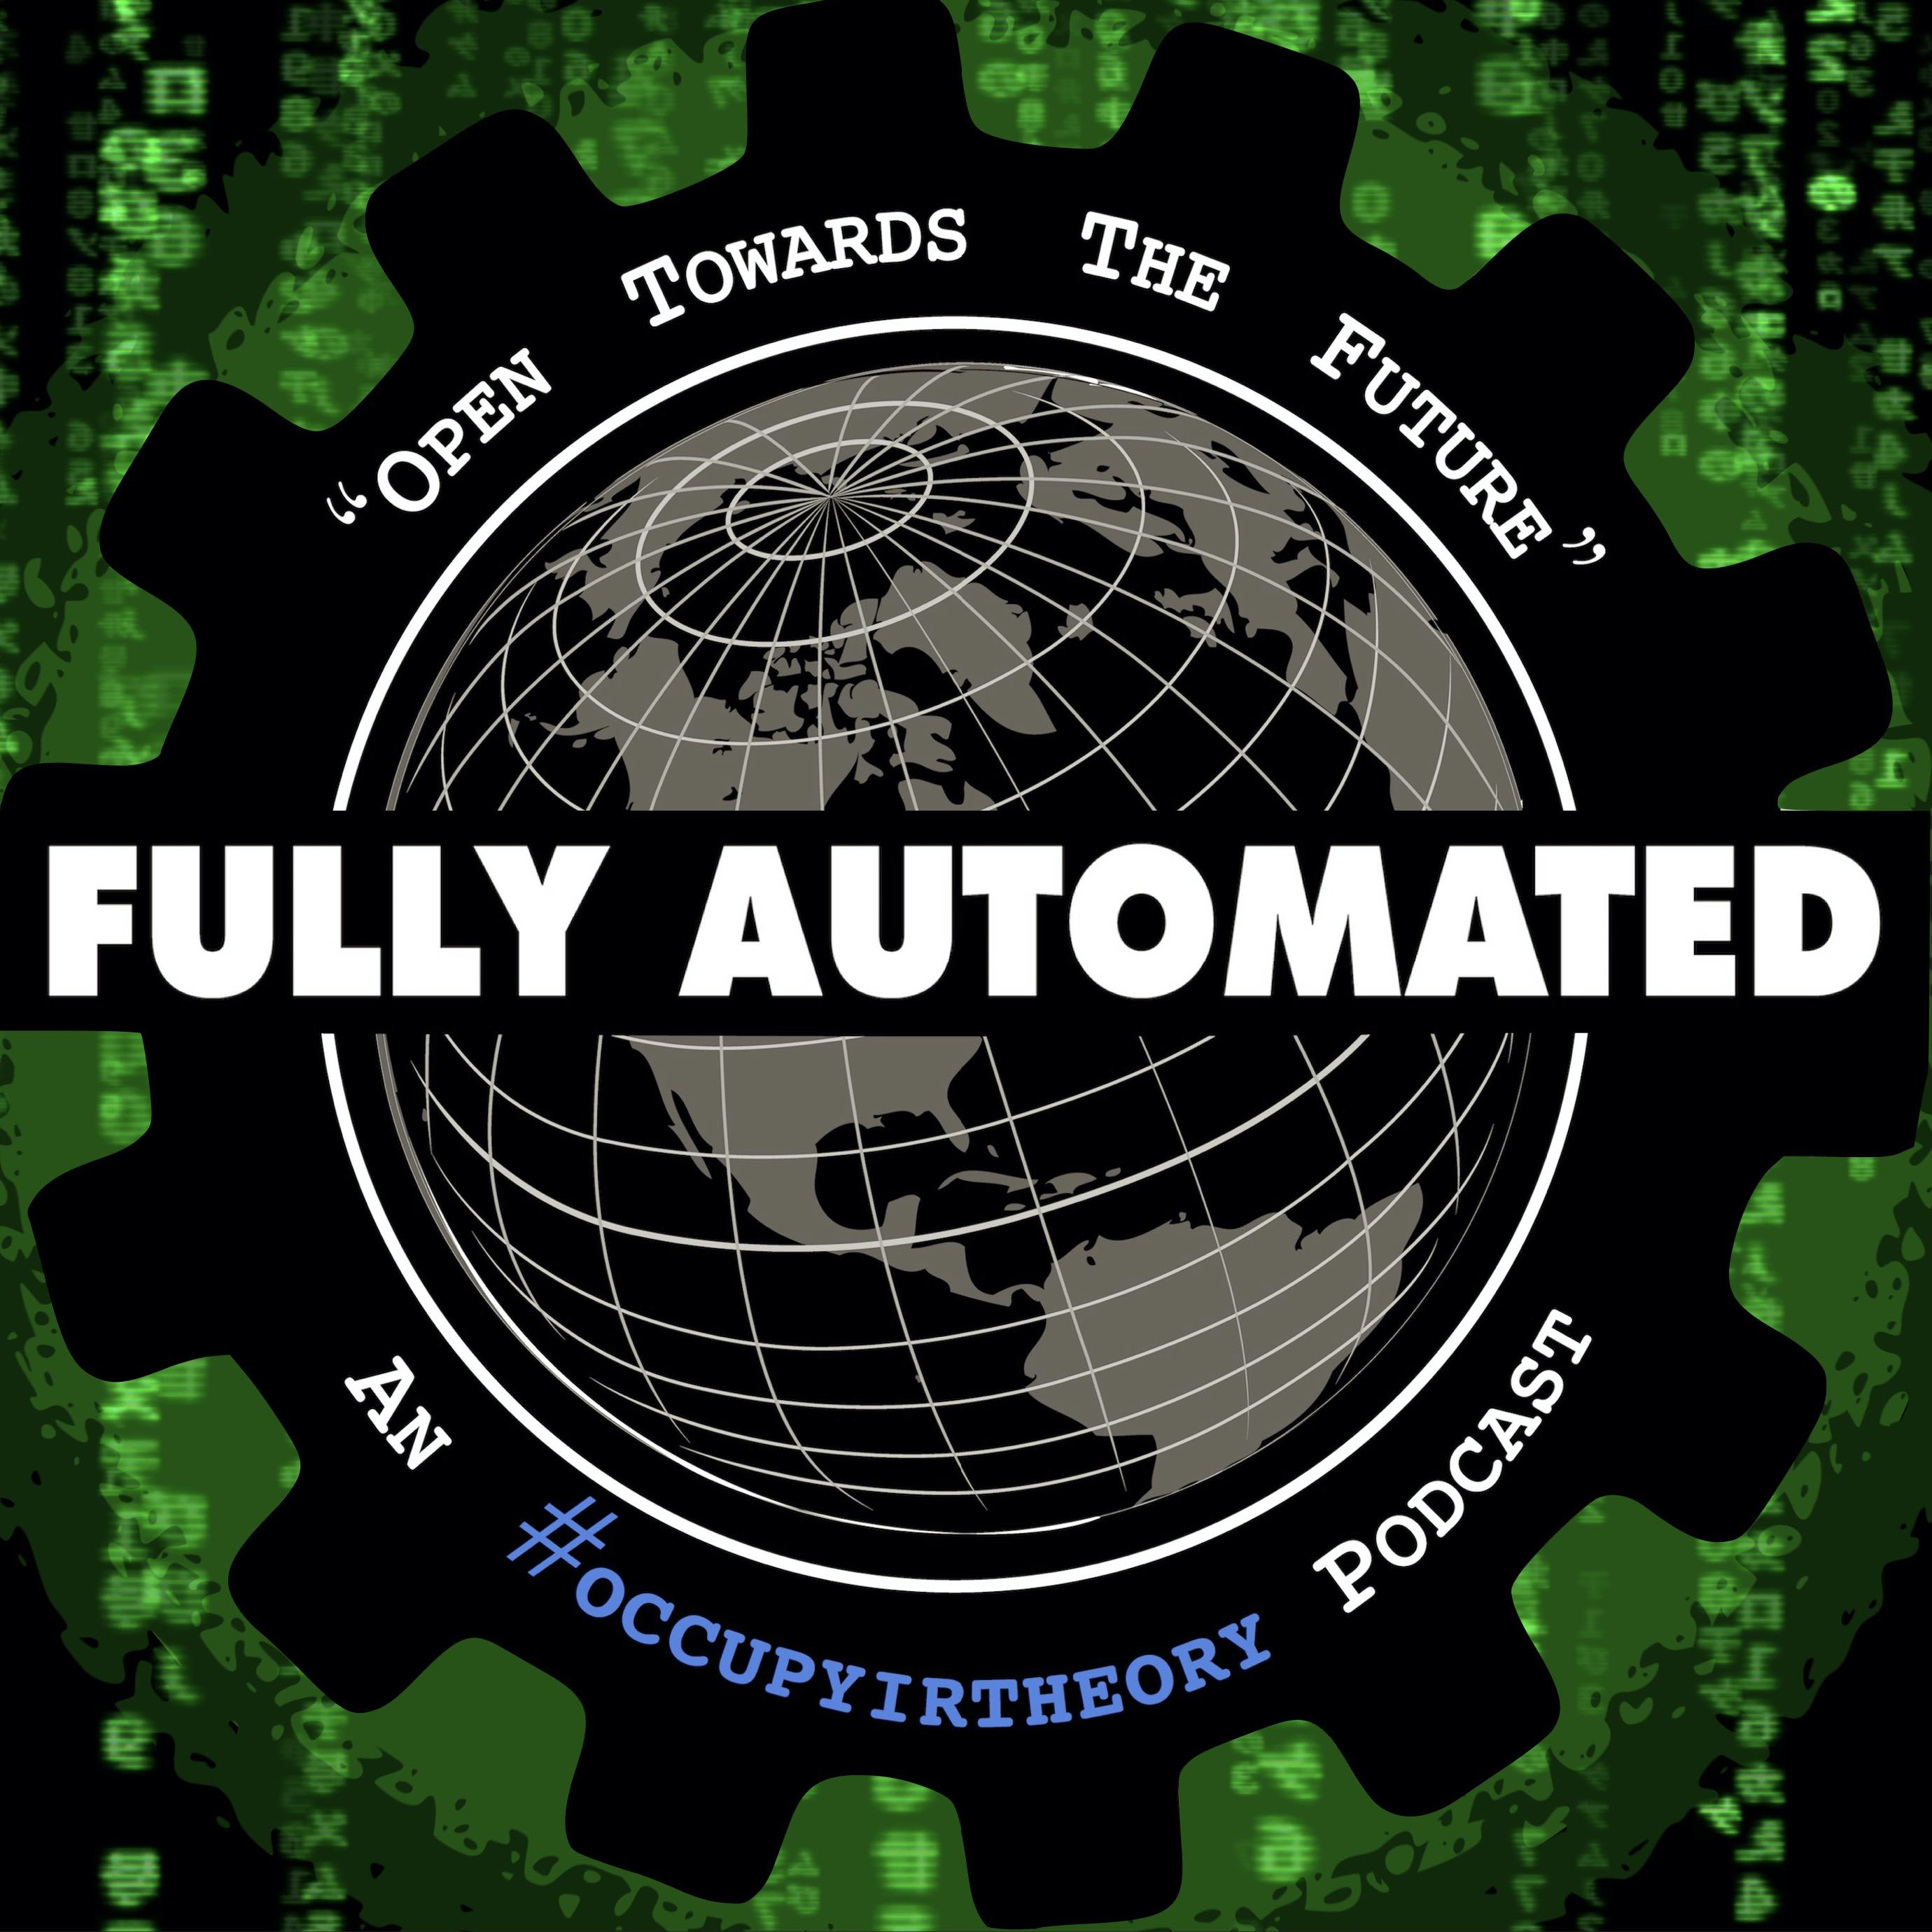 Fully Automated